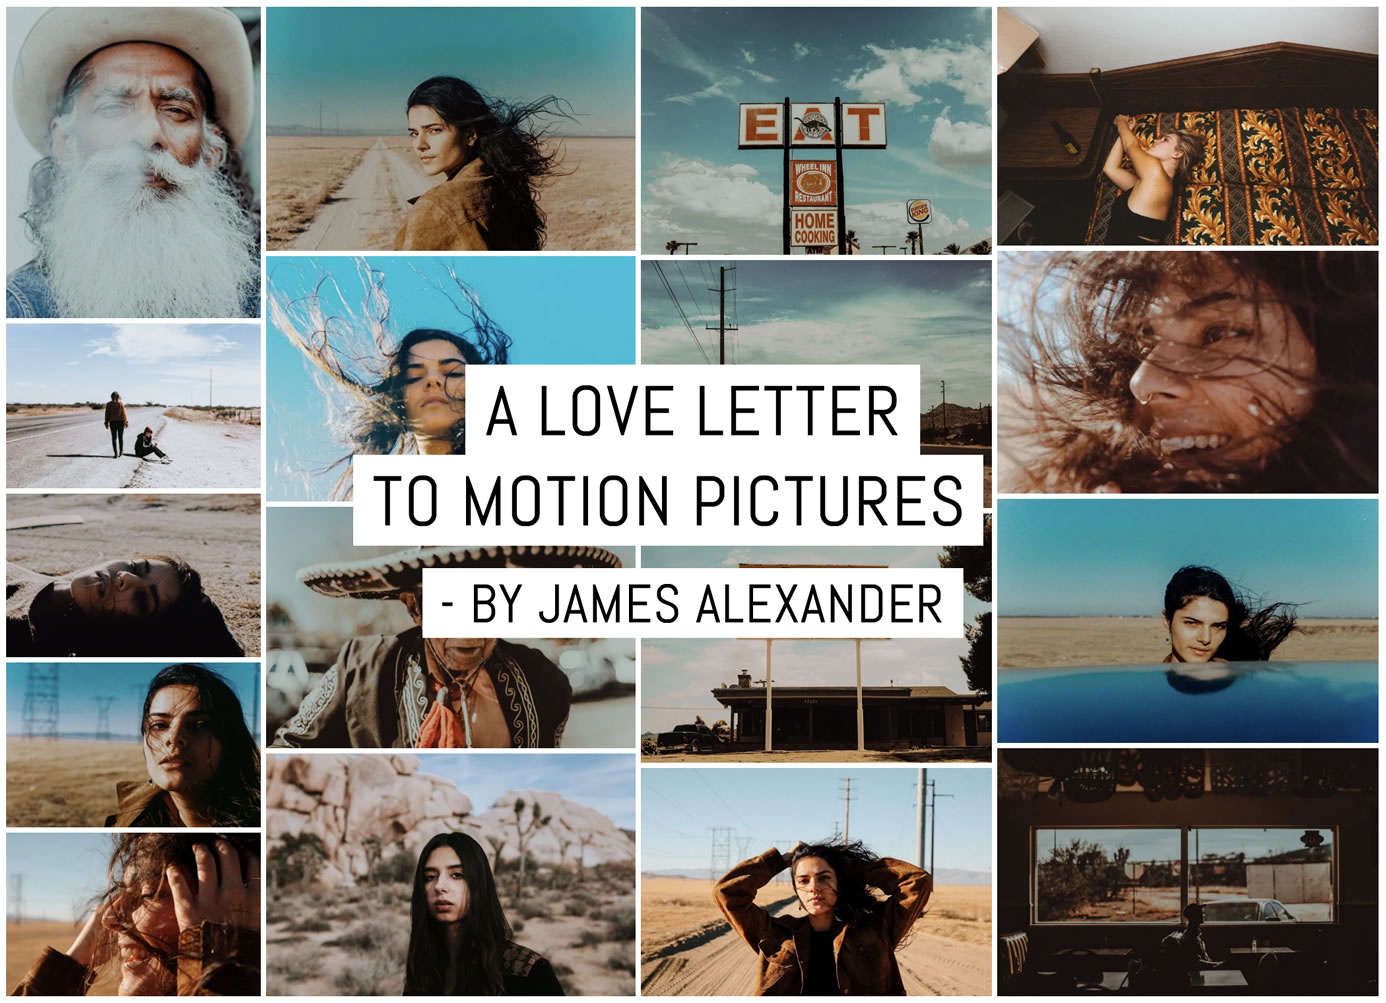 A love letter to motion pictures